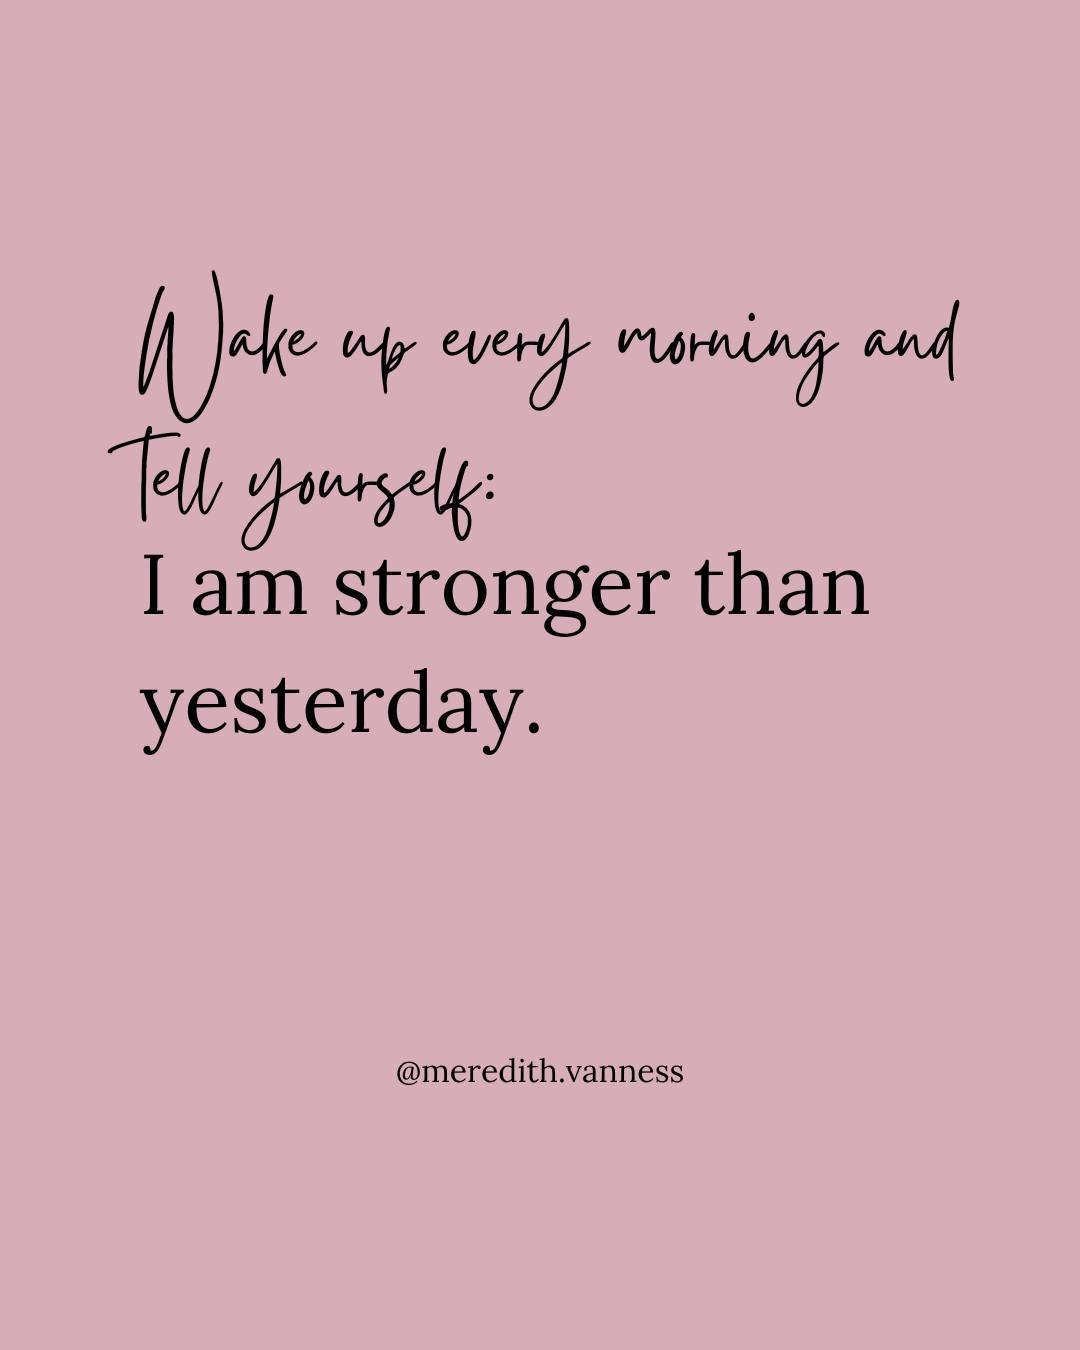 Let's wake up intentional and set the tone for a strong and positive day. ⁠
⁠
What will be your mantra today?  A simple phrase to remind yourself of your strength and goals.⁠
⁠
Here are some ideas to get you started:⁠
&quot;I am stronger than yesterd